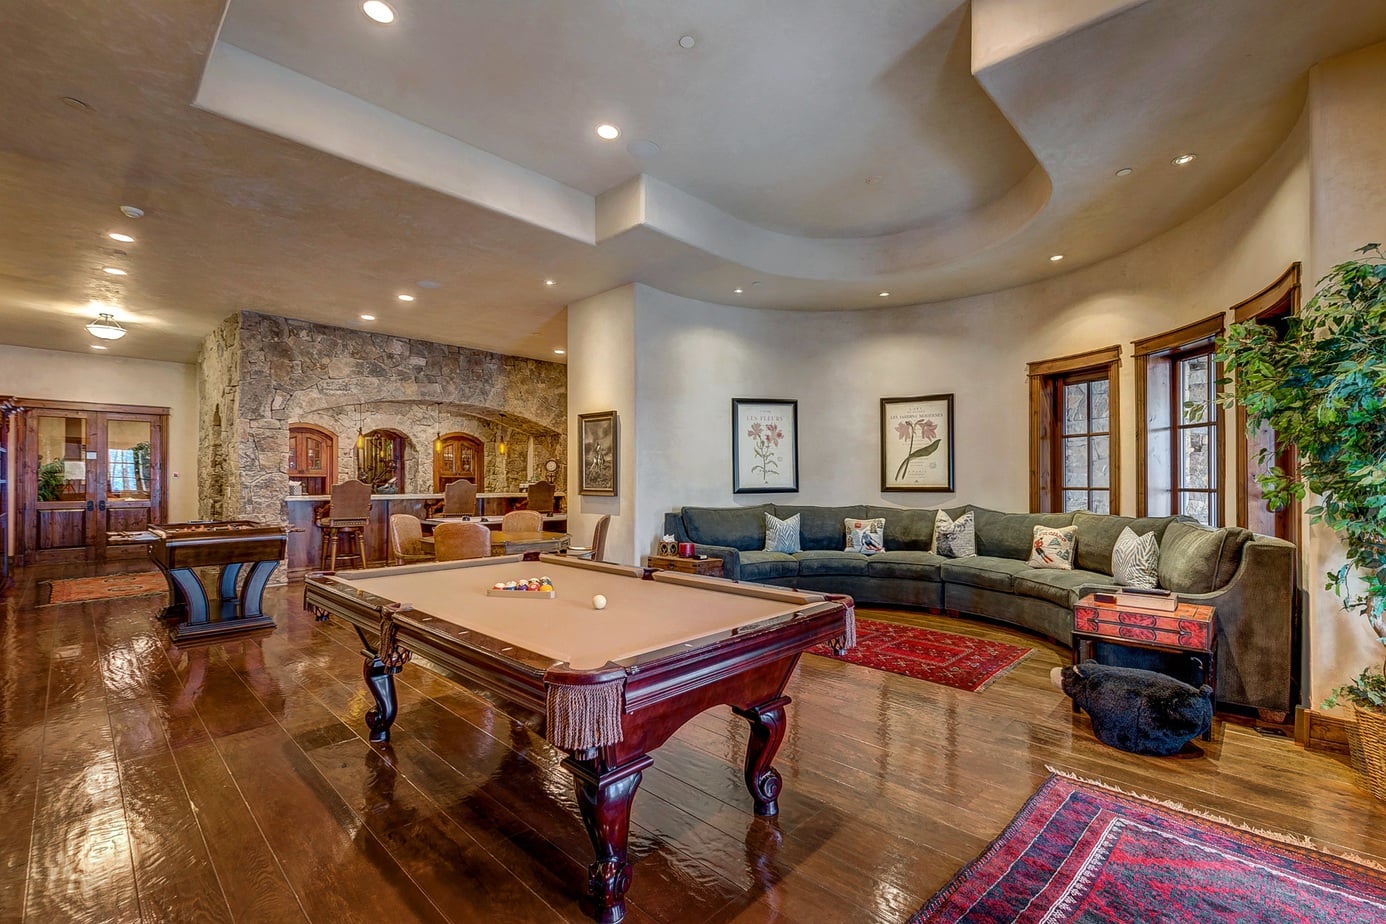 What parameters to consider when choosing a pool table for home?